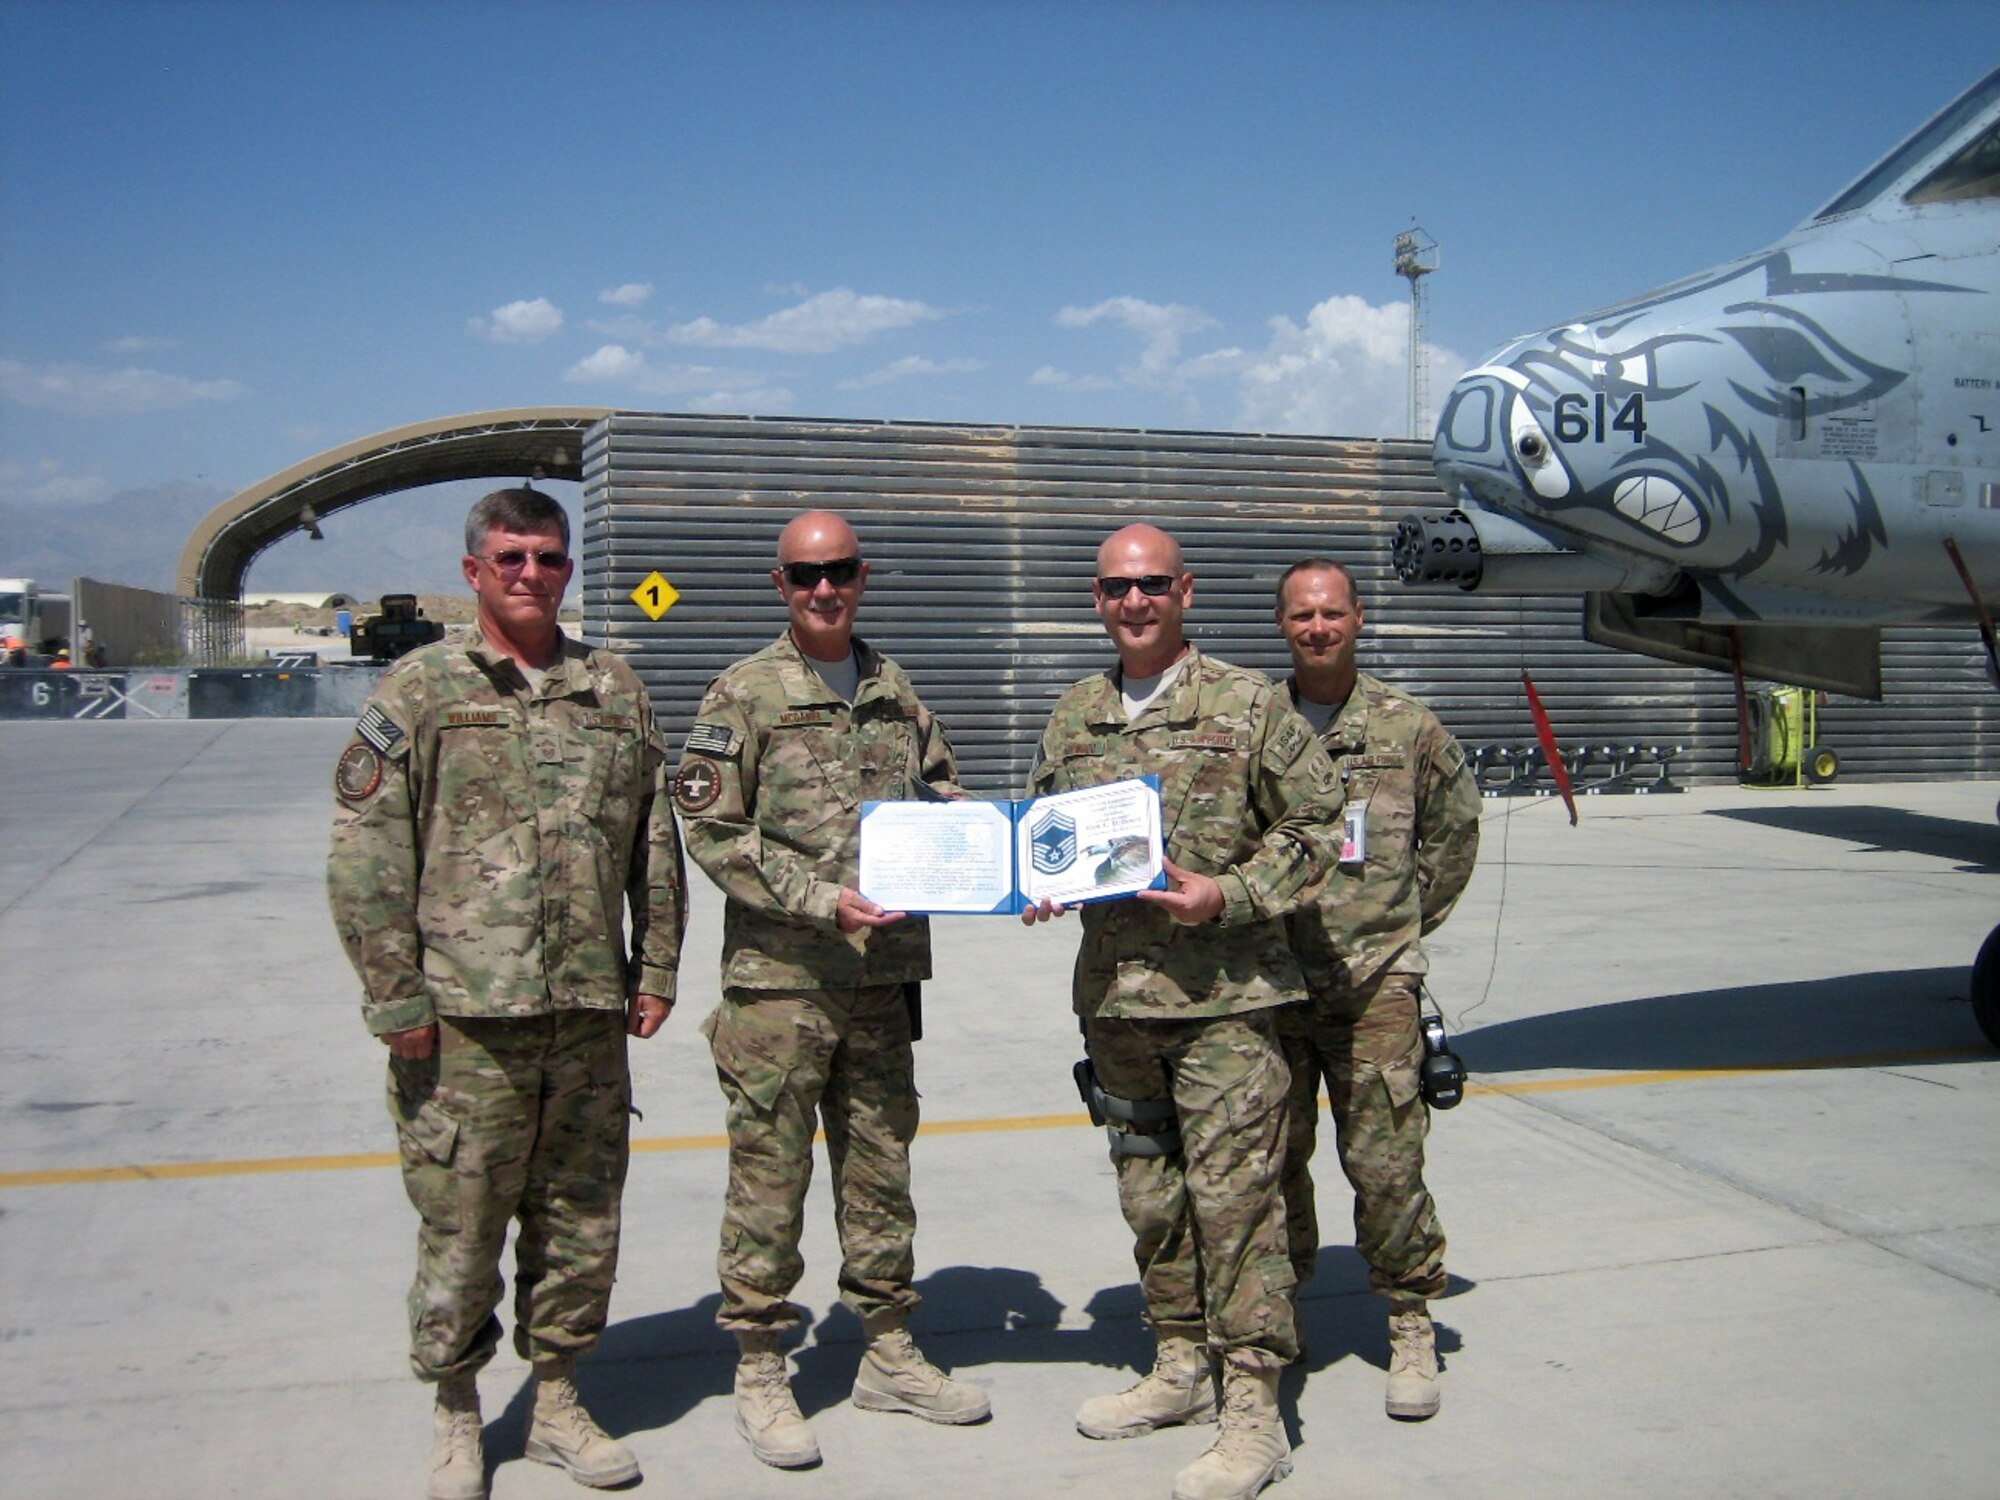 From left, Chief Master Sgt. Fred Williams, Chief Master Sgt. Mark McDaniel, Chief Master Sgt. Matthew Hopwood and Chief Master Sgt. Donnie Frederick. McDaniel was recently promoted to chief master sergeant at Bagram Airfield, Afghanistan. Williams, McDaniel and Frederick are members of the 188th Fighter Wing, which has approximately 375 Airmen currently deployed to Afghanistan in support of Operation Enduring Freedom. (Courtesy photo)